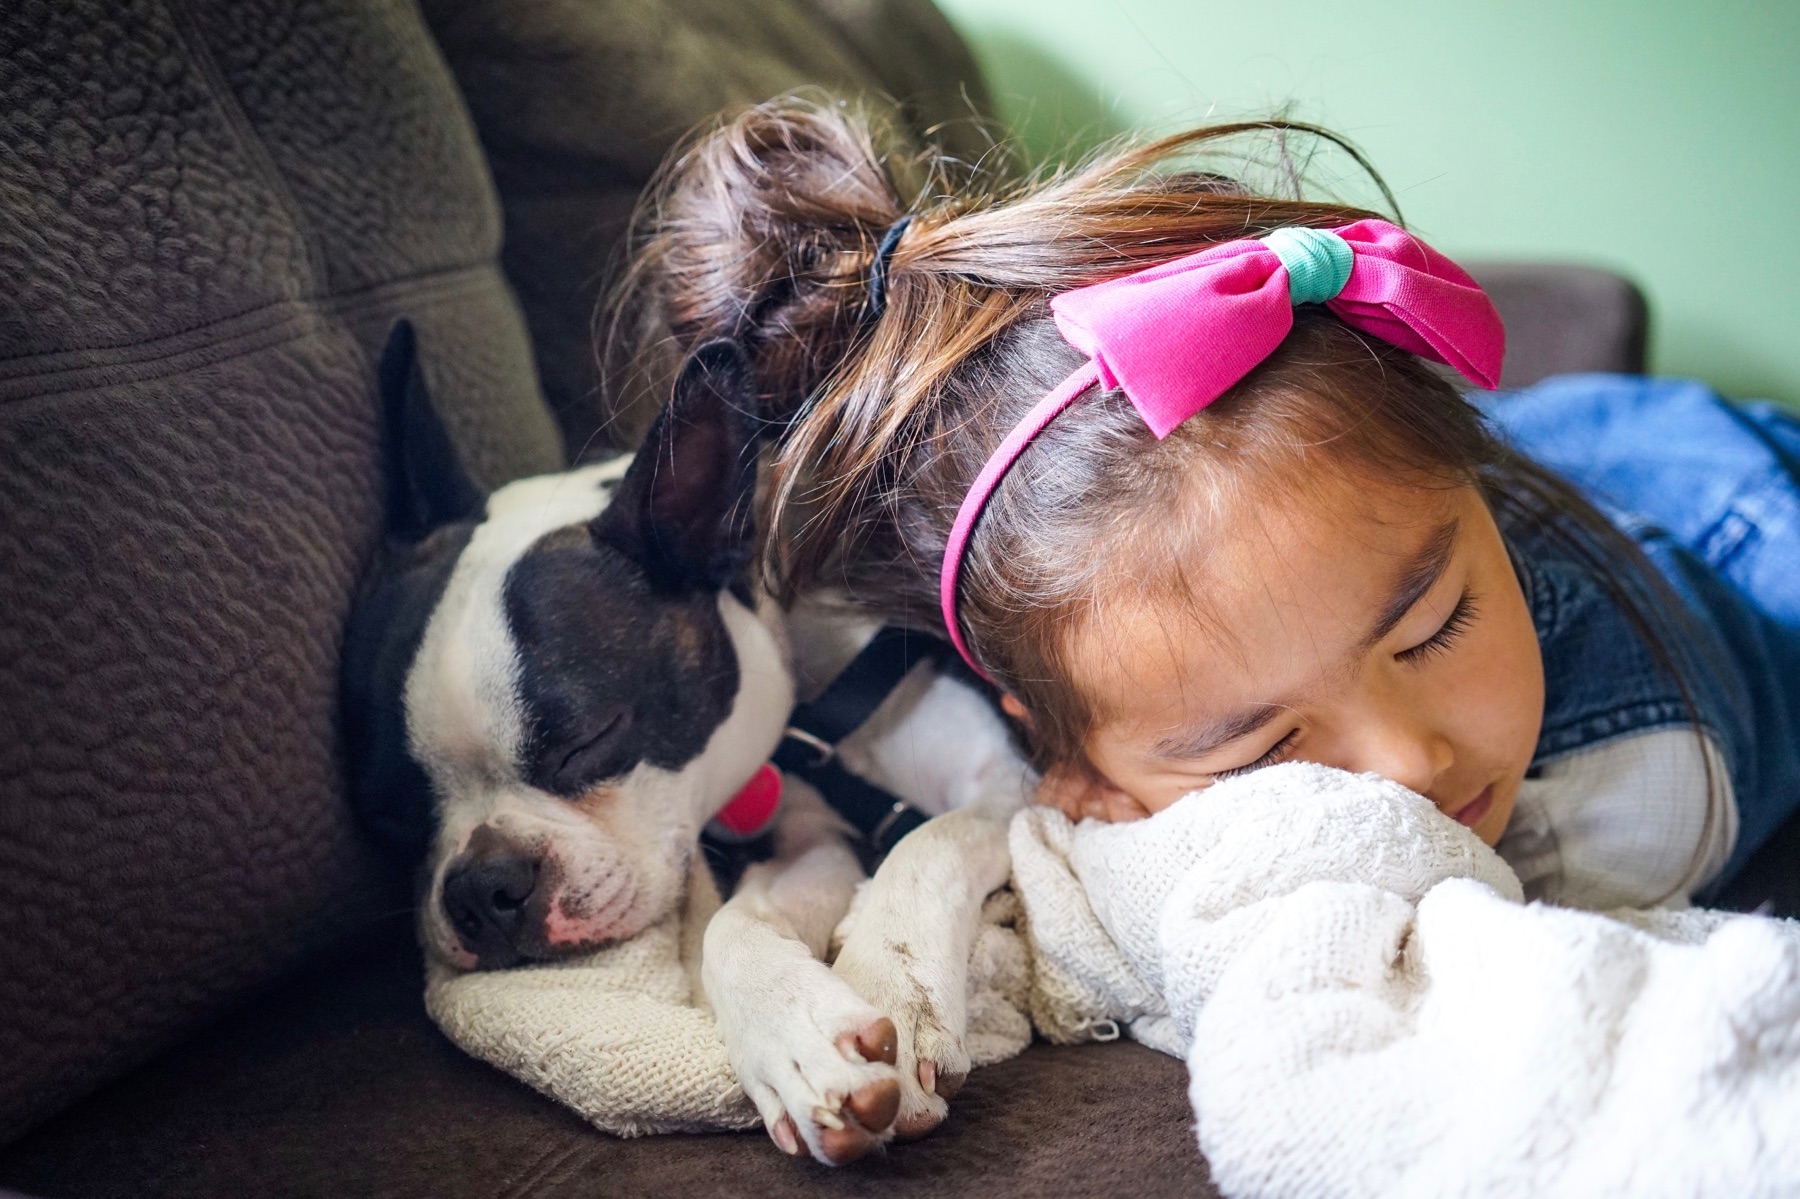 A young girl takes a nap with her dog.